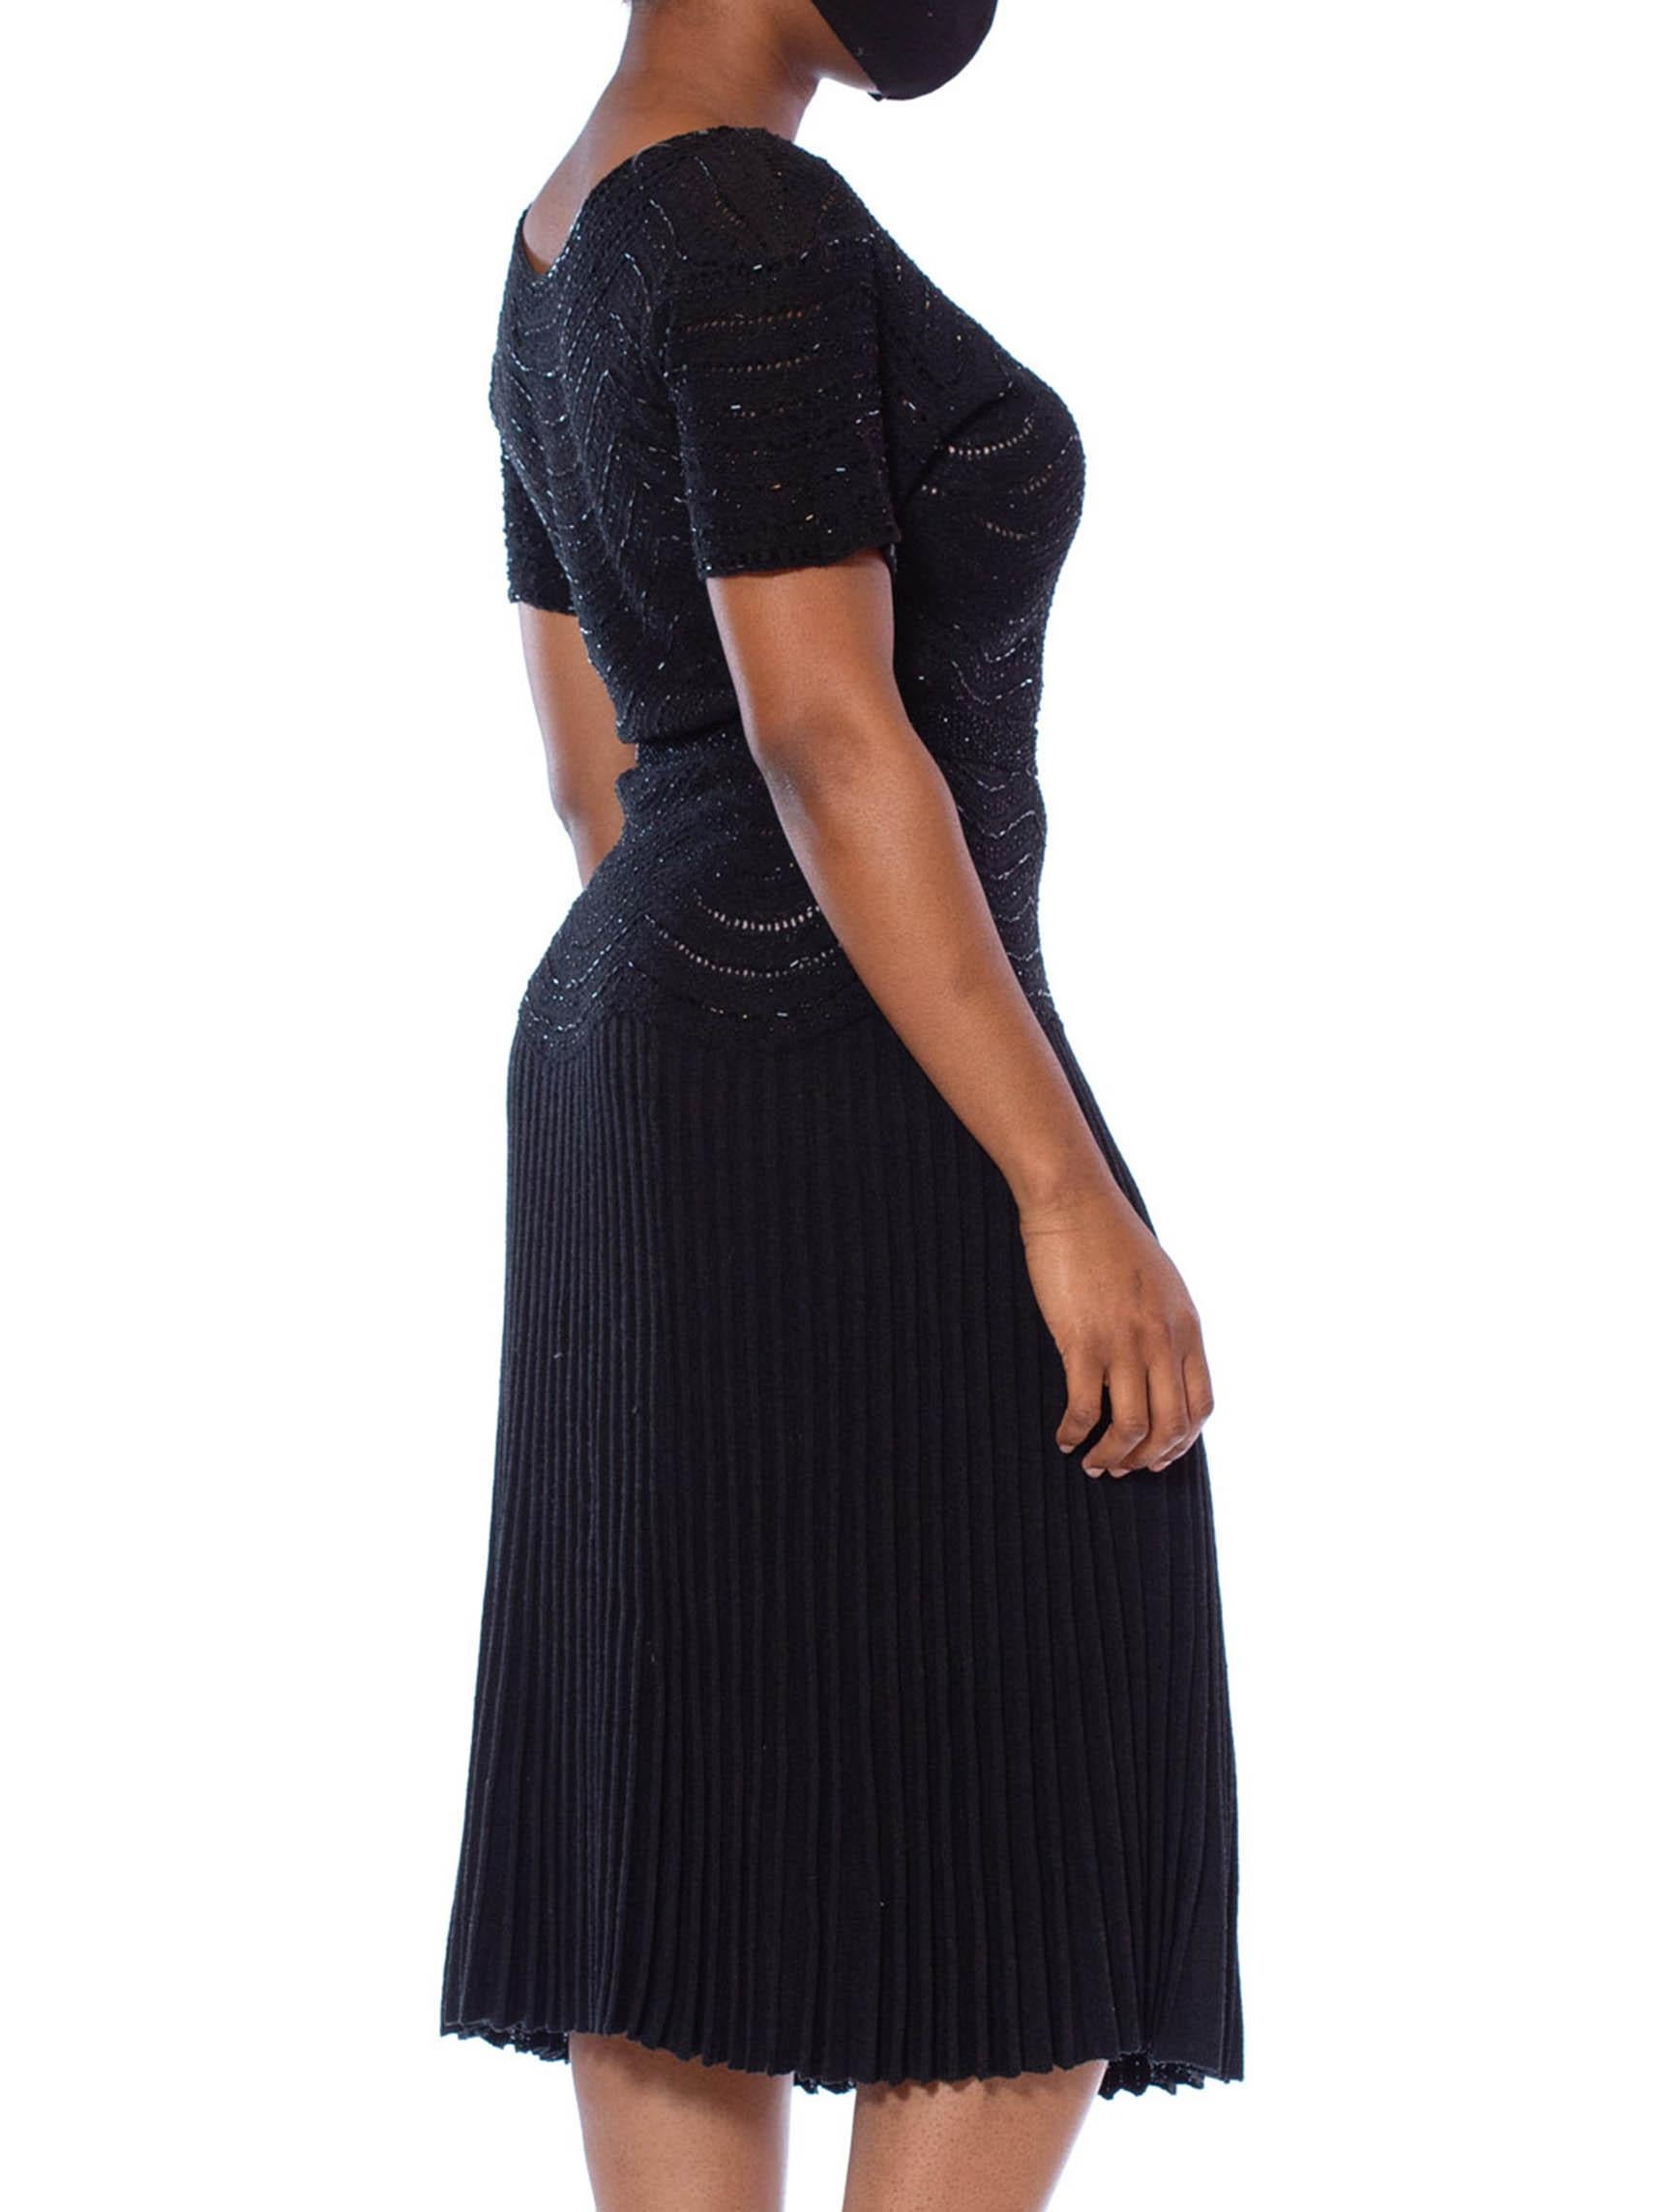 1950S Black Beaded Rayon Knit Wiggle Dress For Sale 1